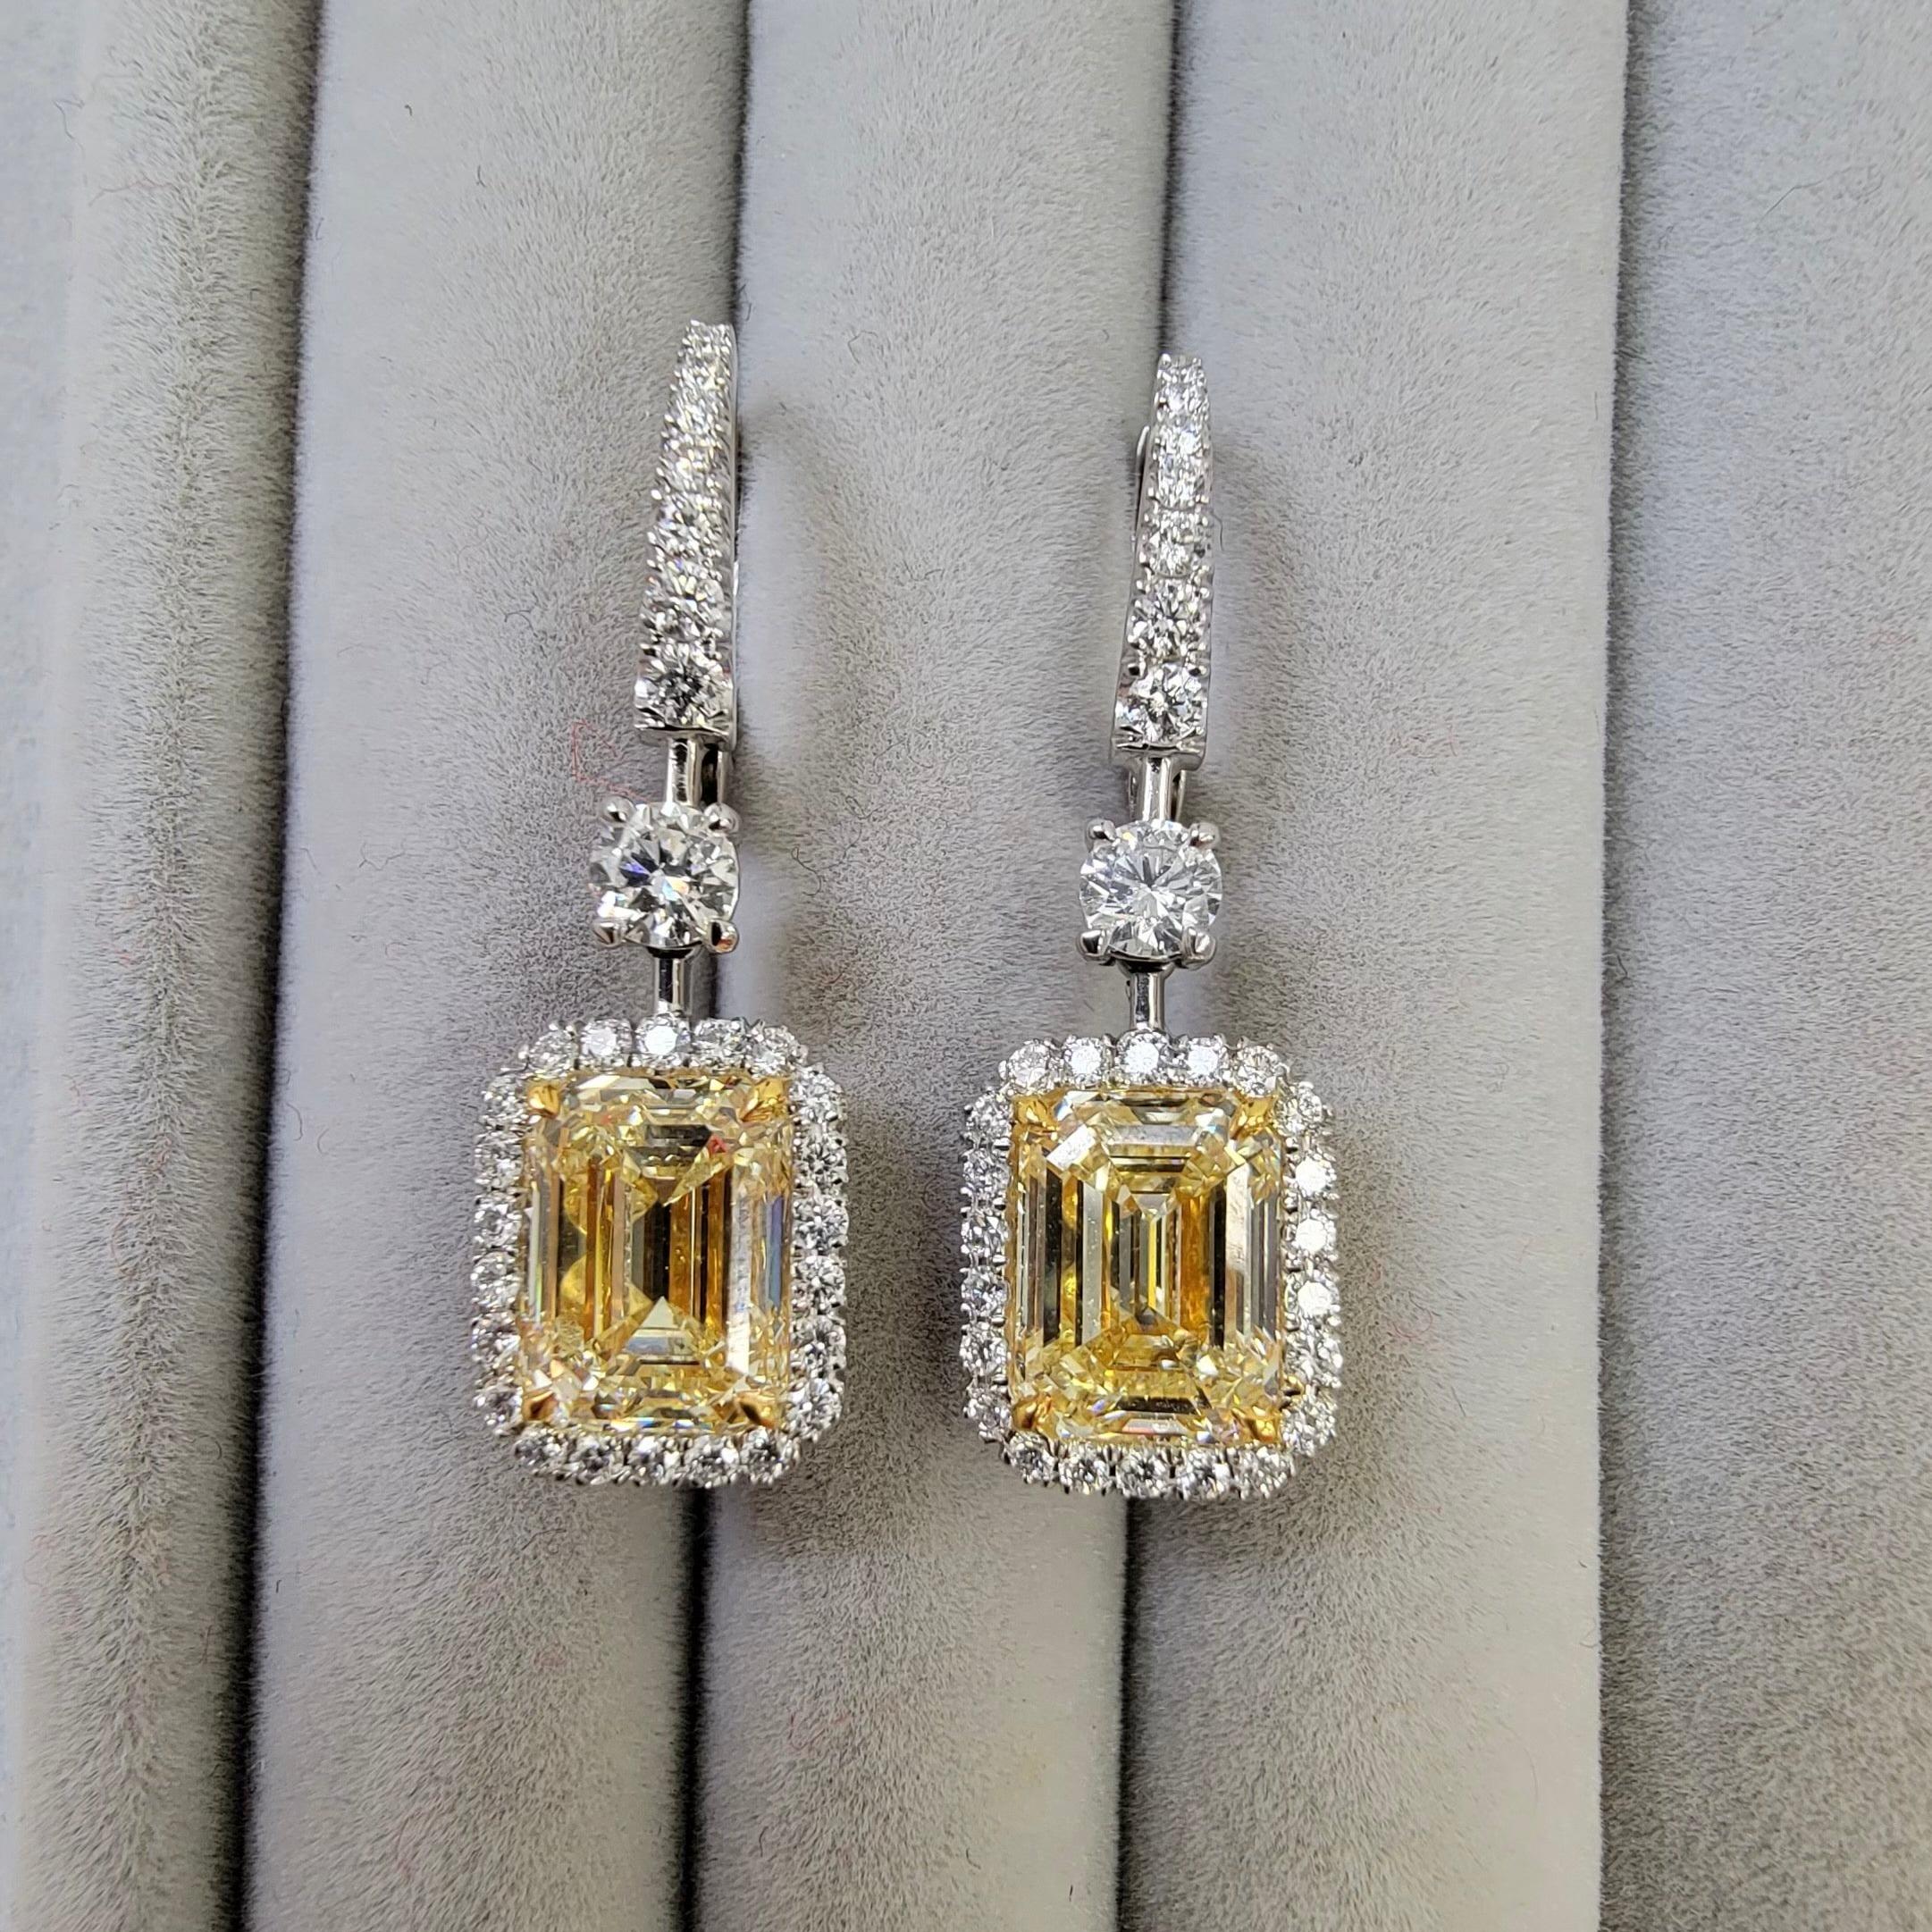 2.76 and 2.50 Carat center diamonds
Light Yellow (U-V Range) 
VS1 and VS2 Clarity
Emerald Cuts
0.84 carats of round white diamonds
Designed to naturally enhance yellow hue in yellow gold
Handcrafted in New York in platinum
GIA Certified Yellow